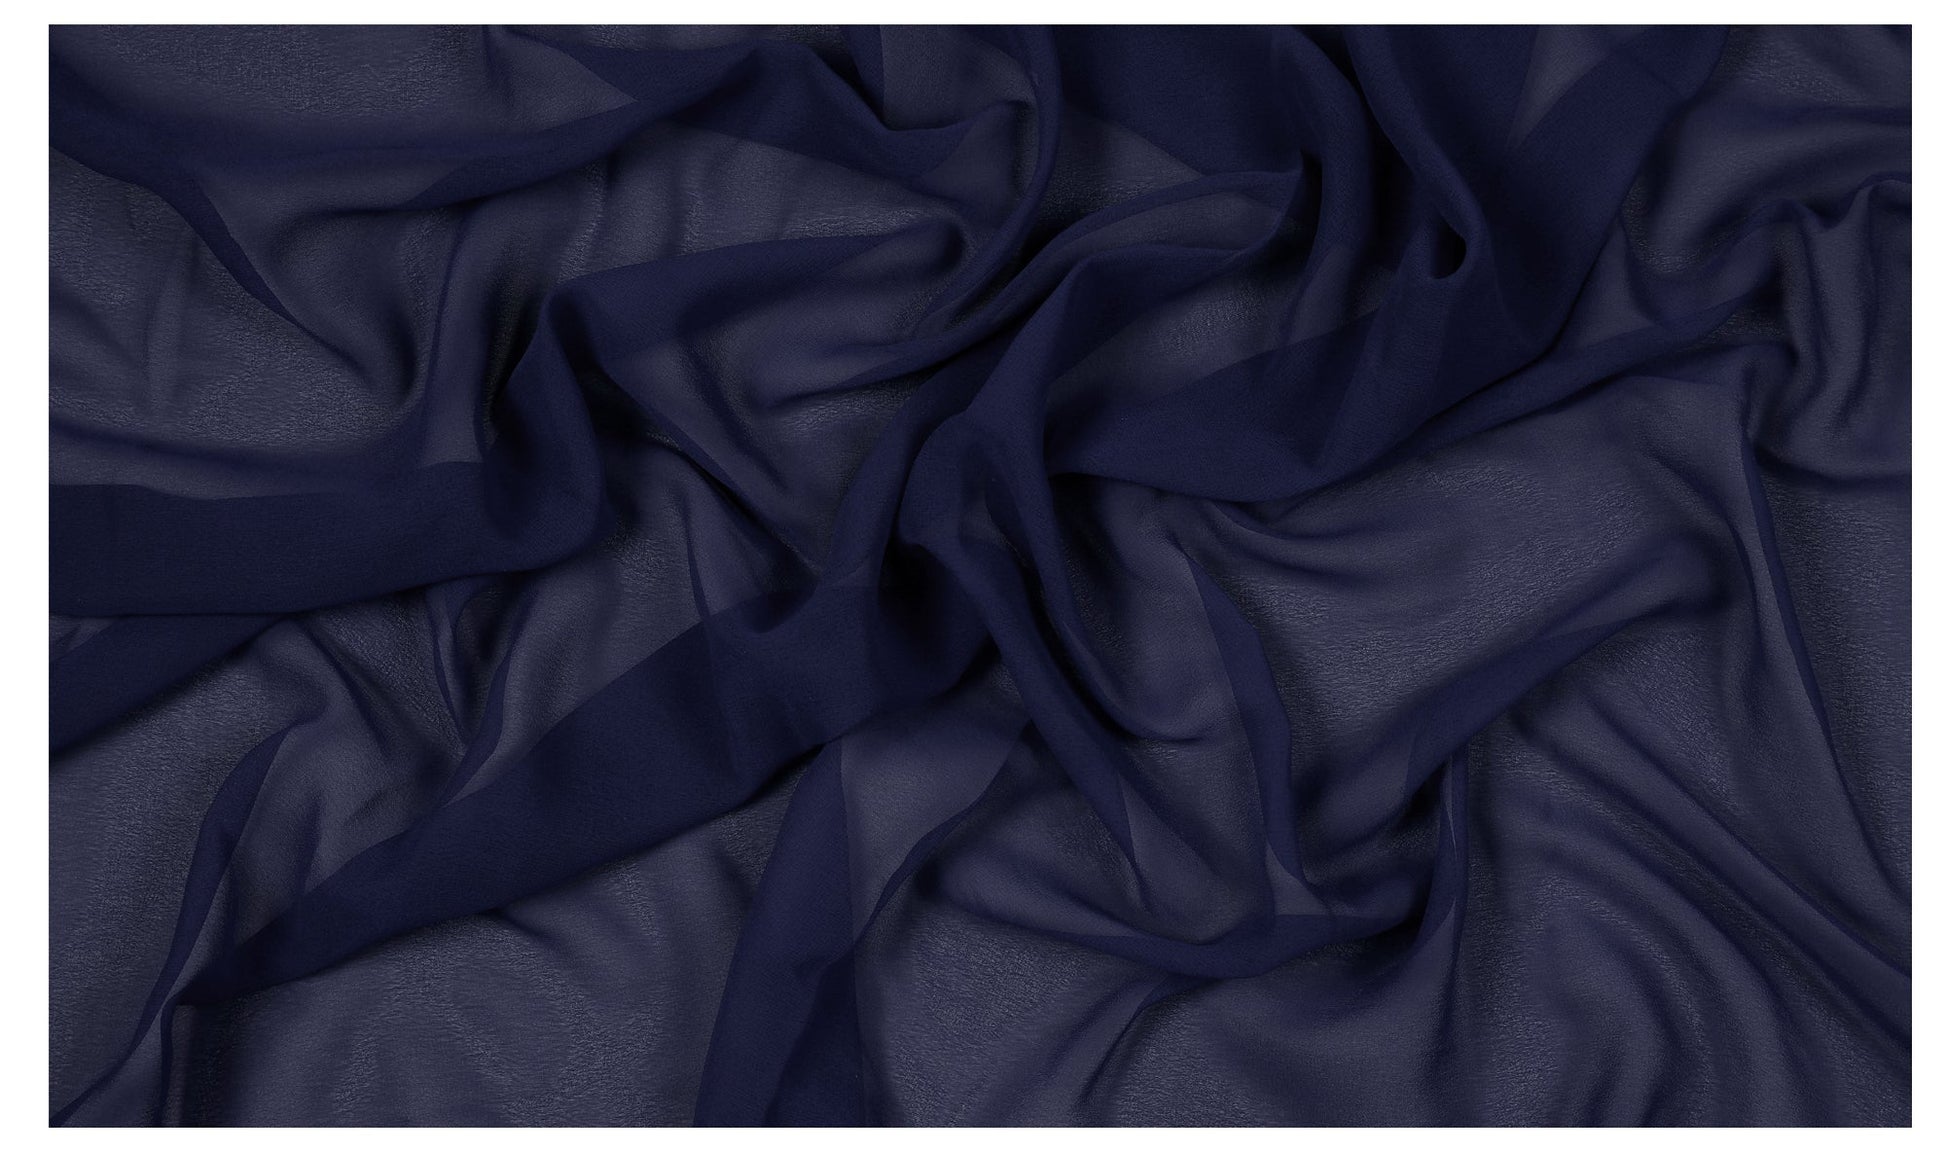 Navy Blue,3e053858-915d-48bf-9049-f3aac5fdc6c2